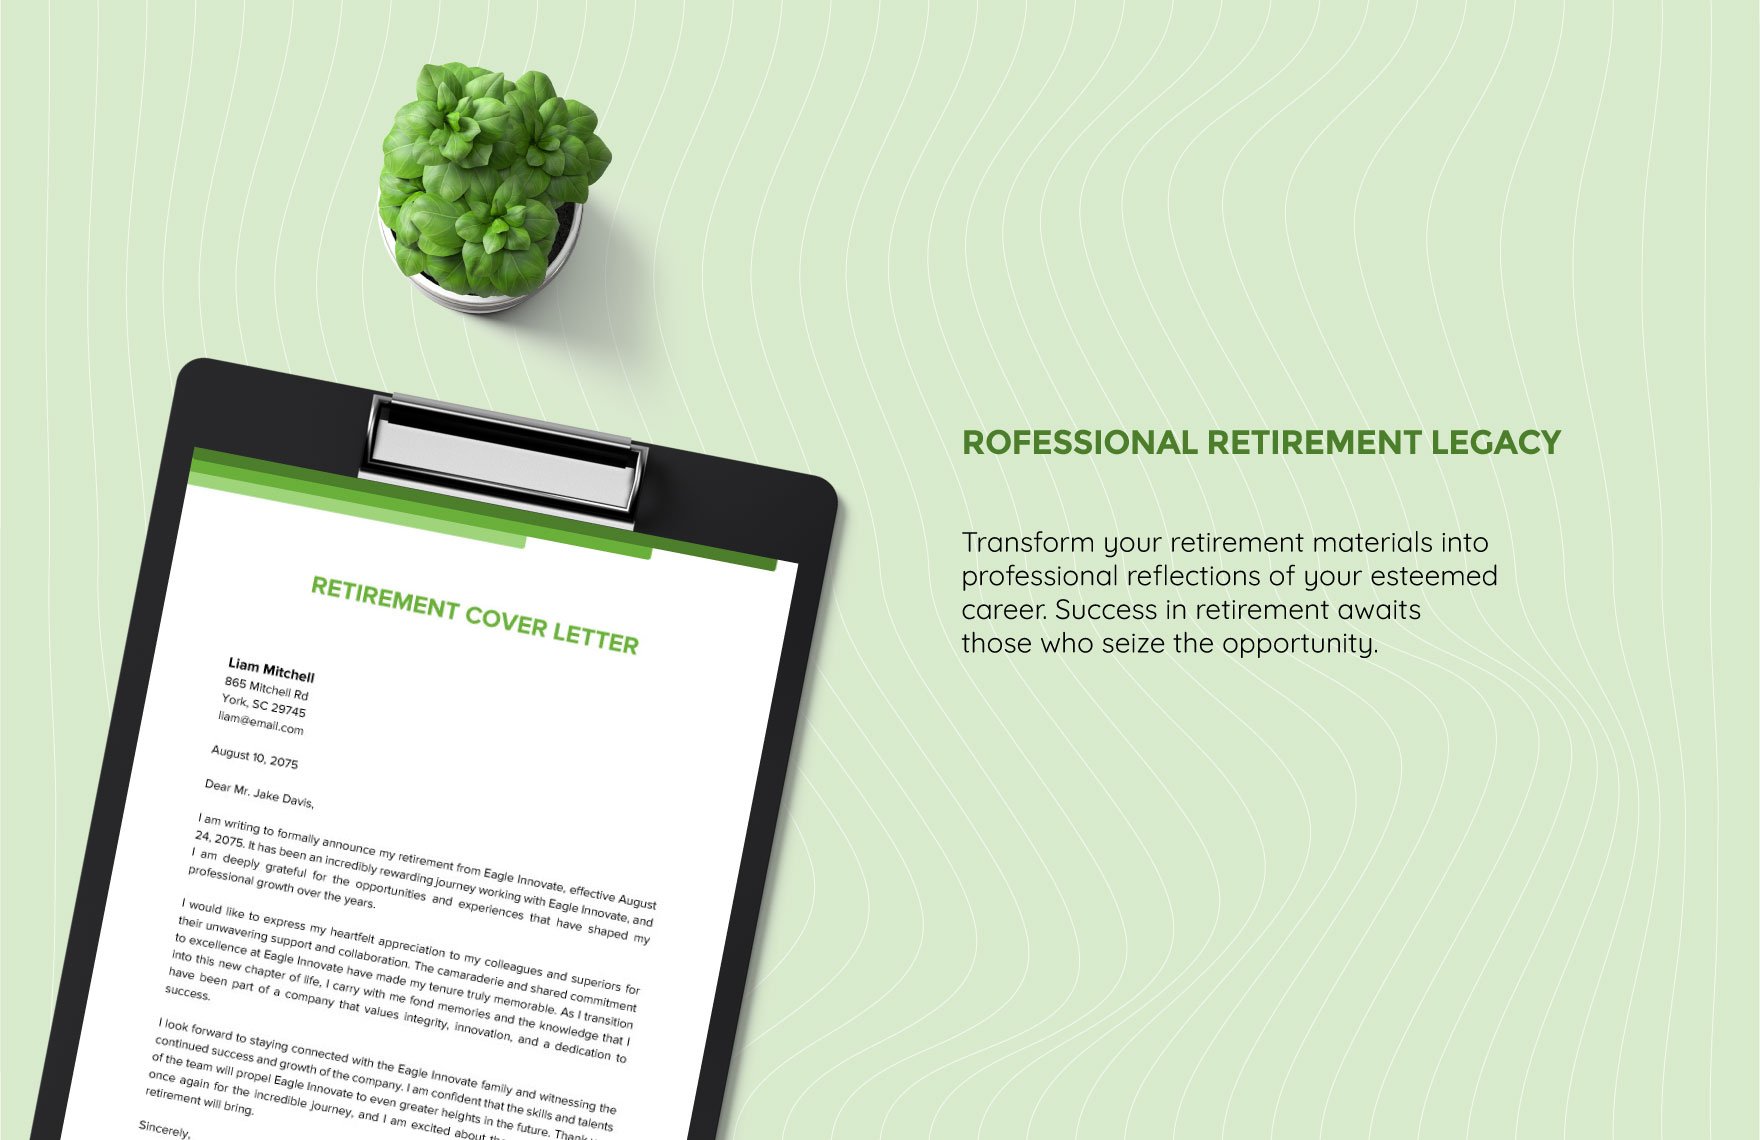 Retirement Cover Letter Template